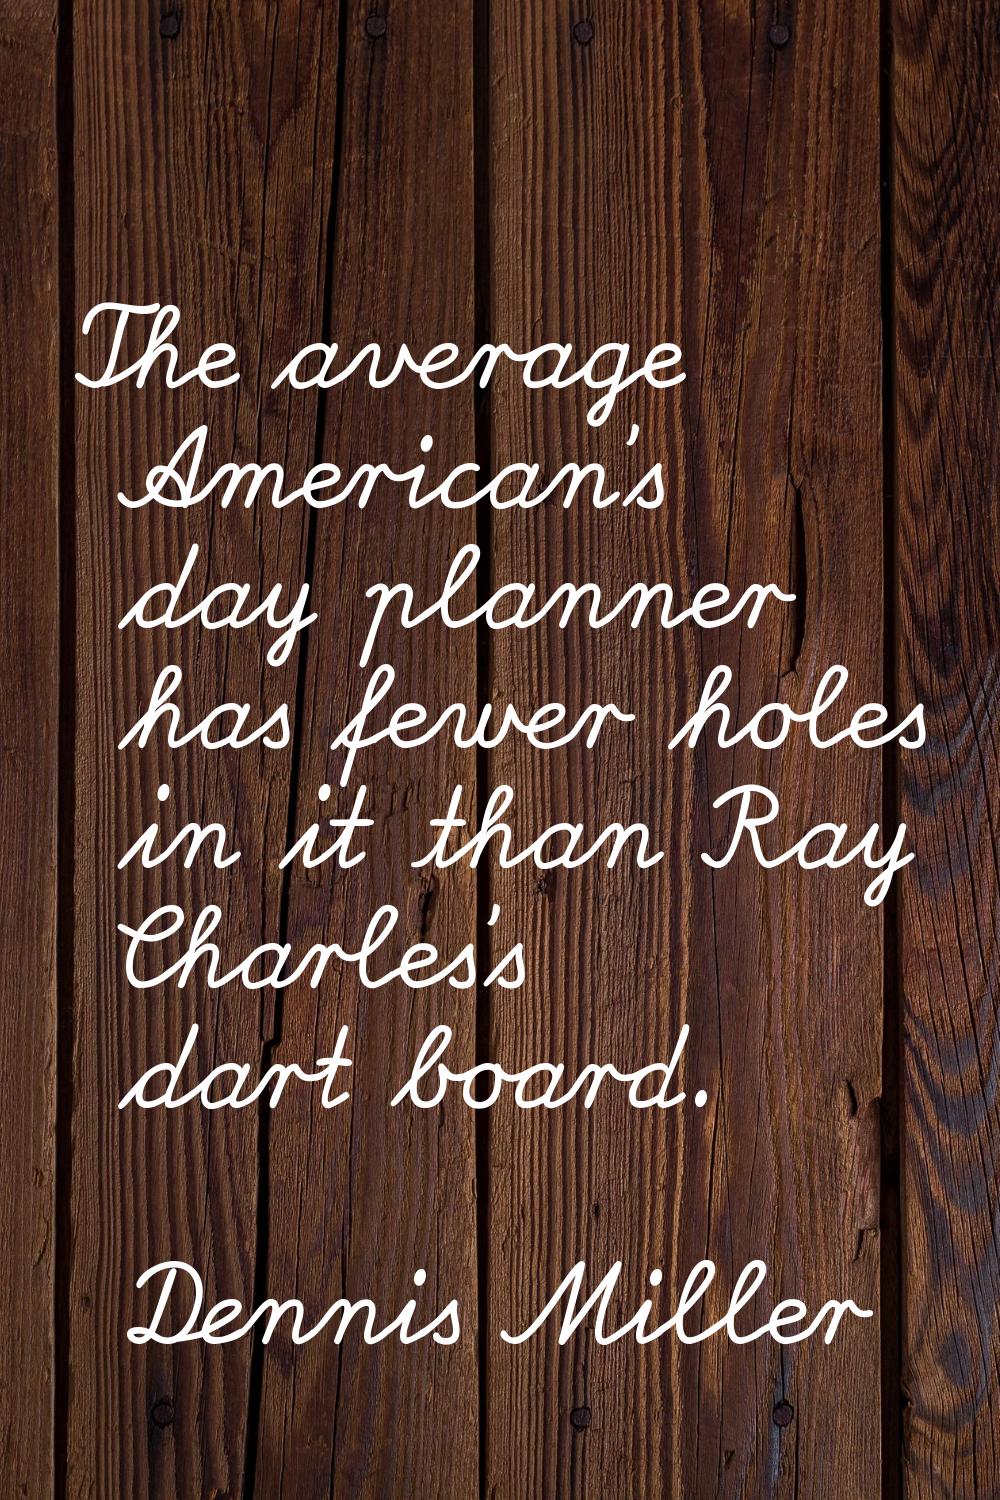 The average American's day planner has fewer holes in it than Ray Charles's dart board.